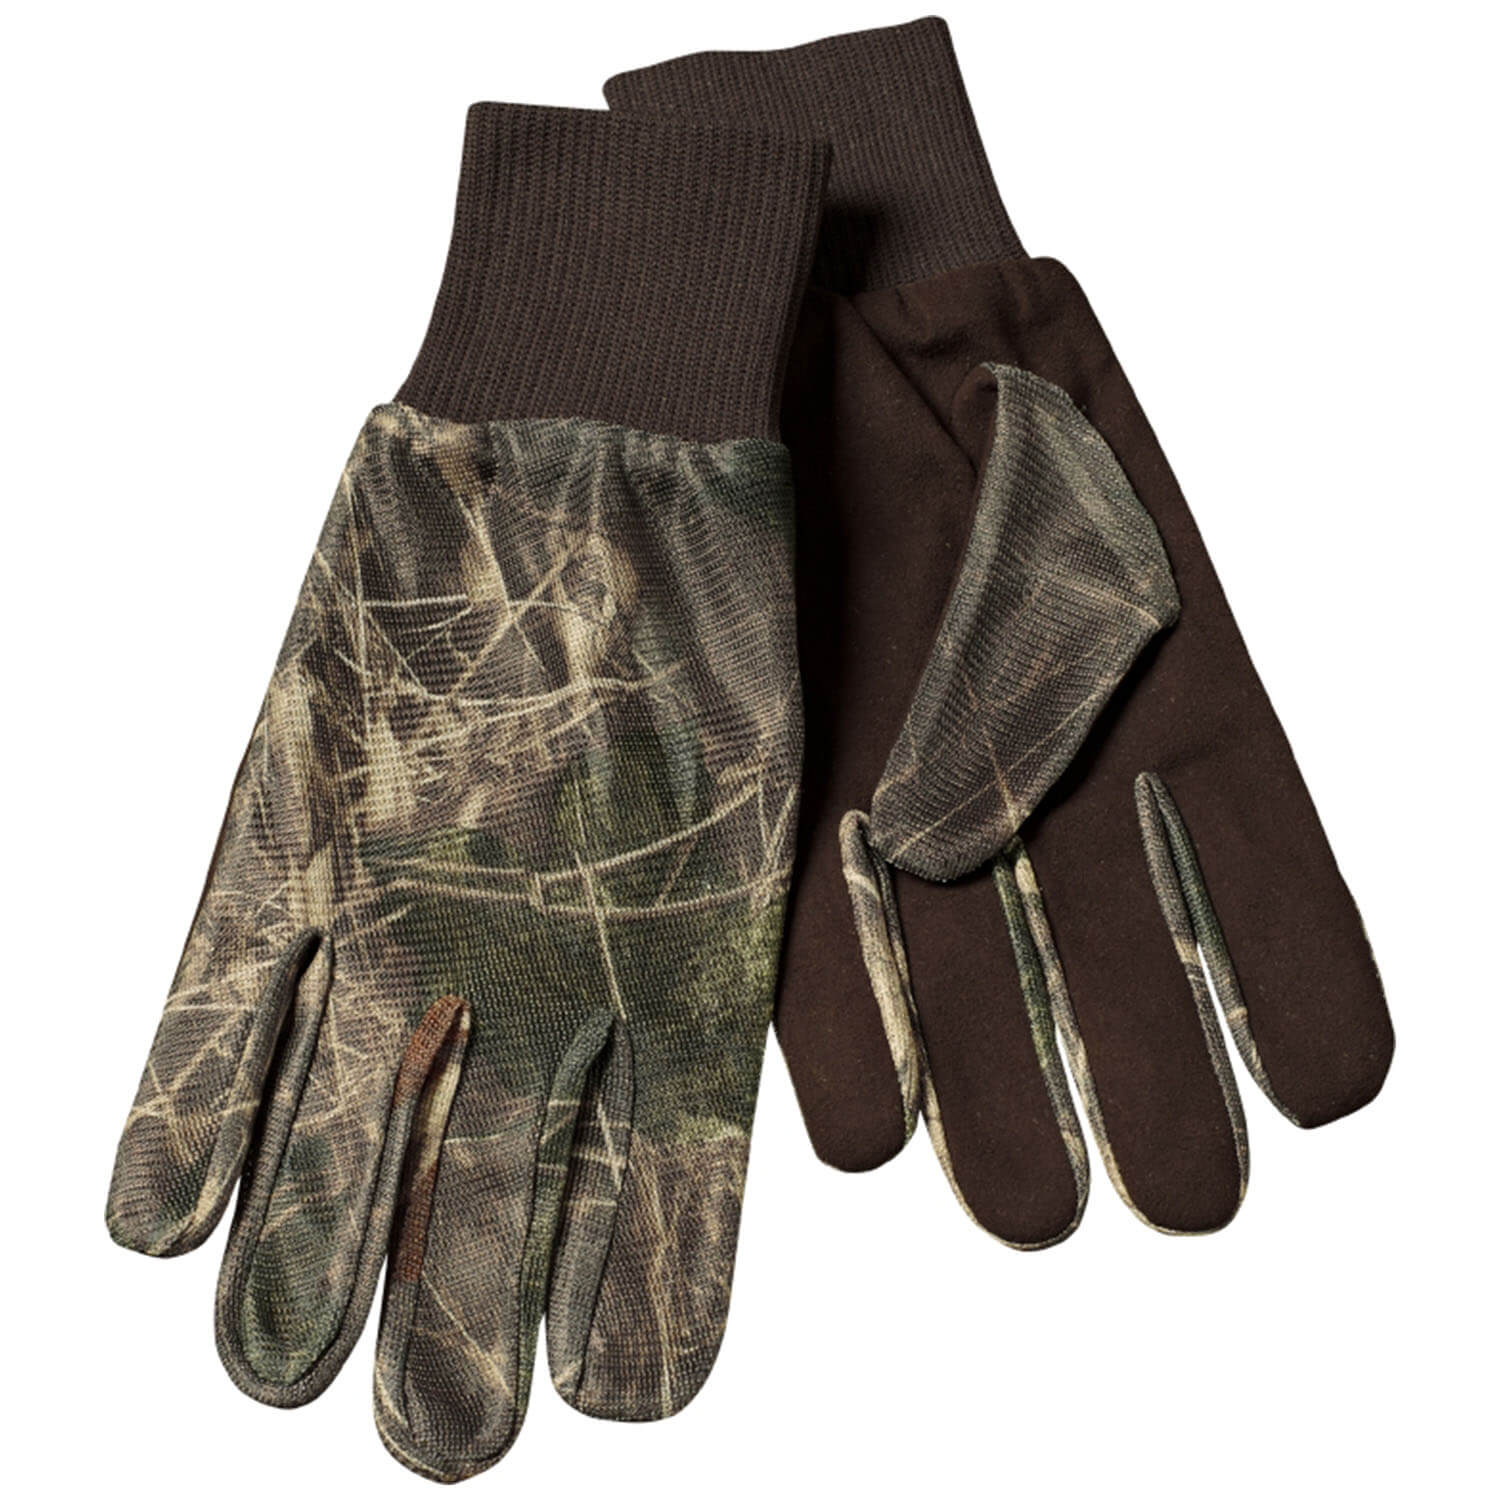 Seeland camo gloves leavy - Hunting Gloves